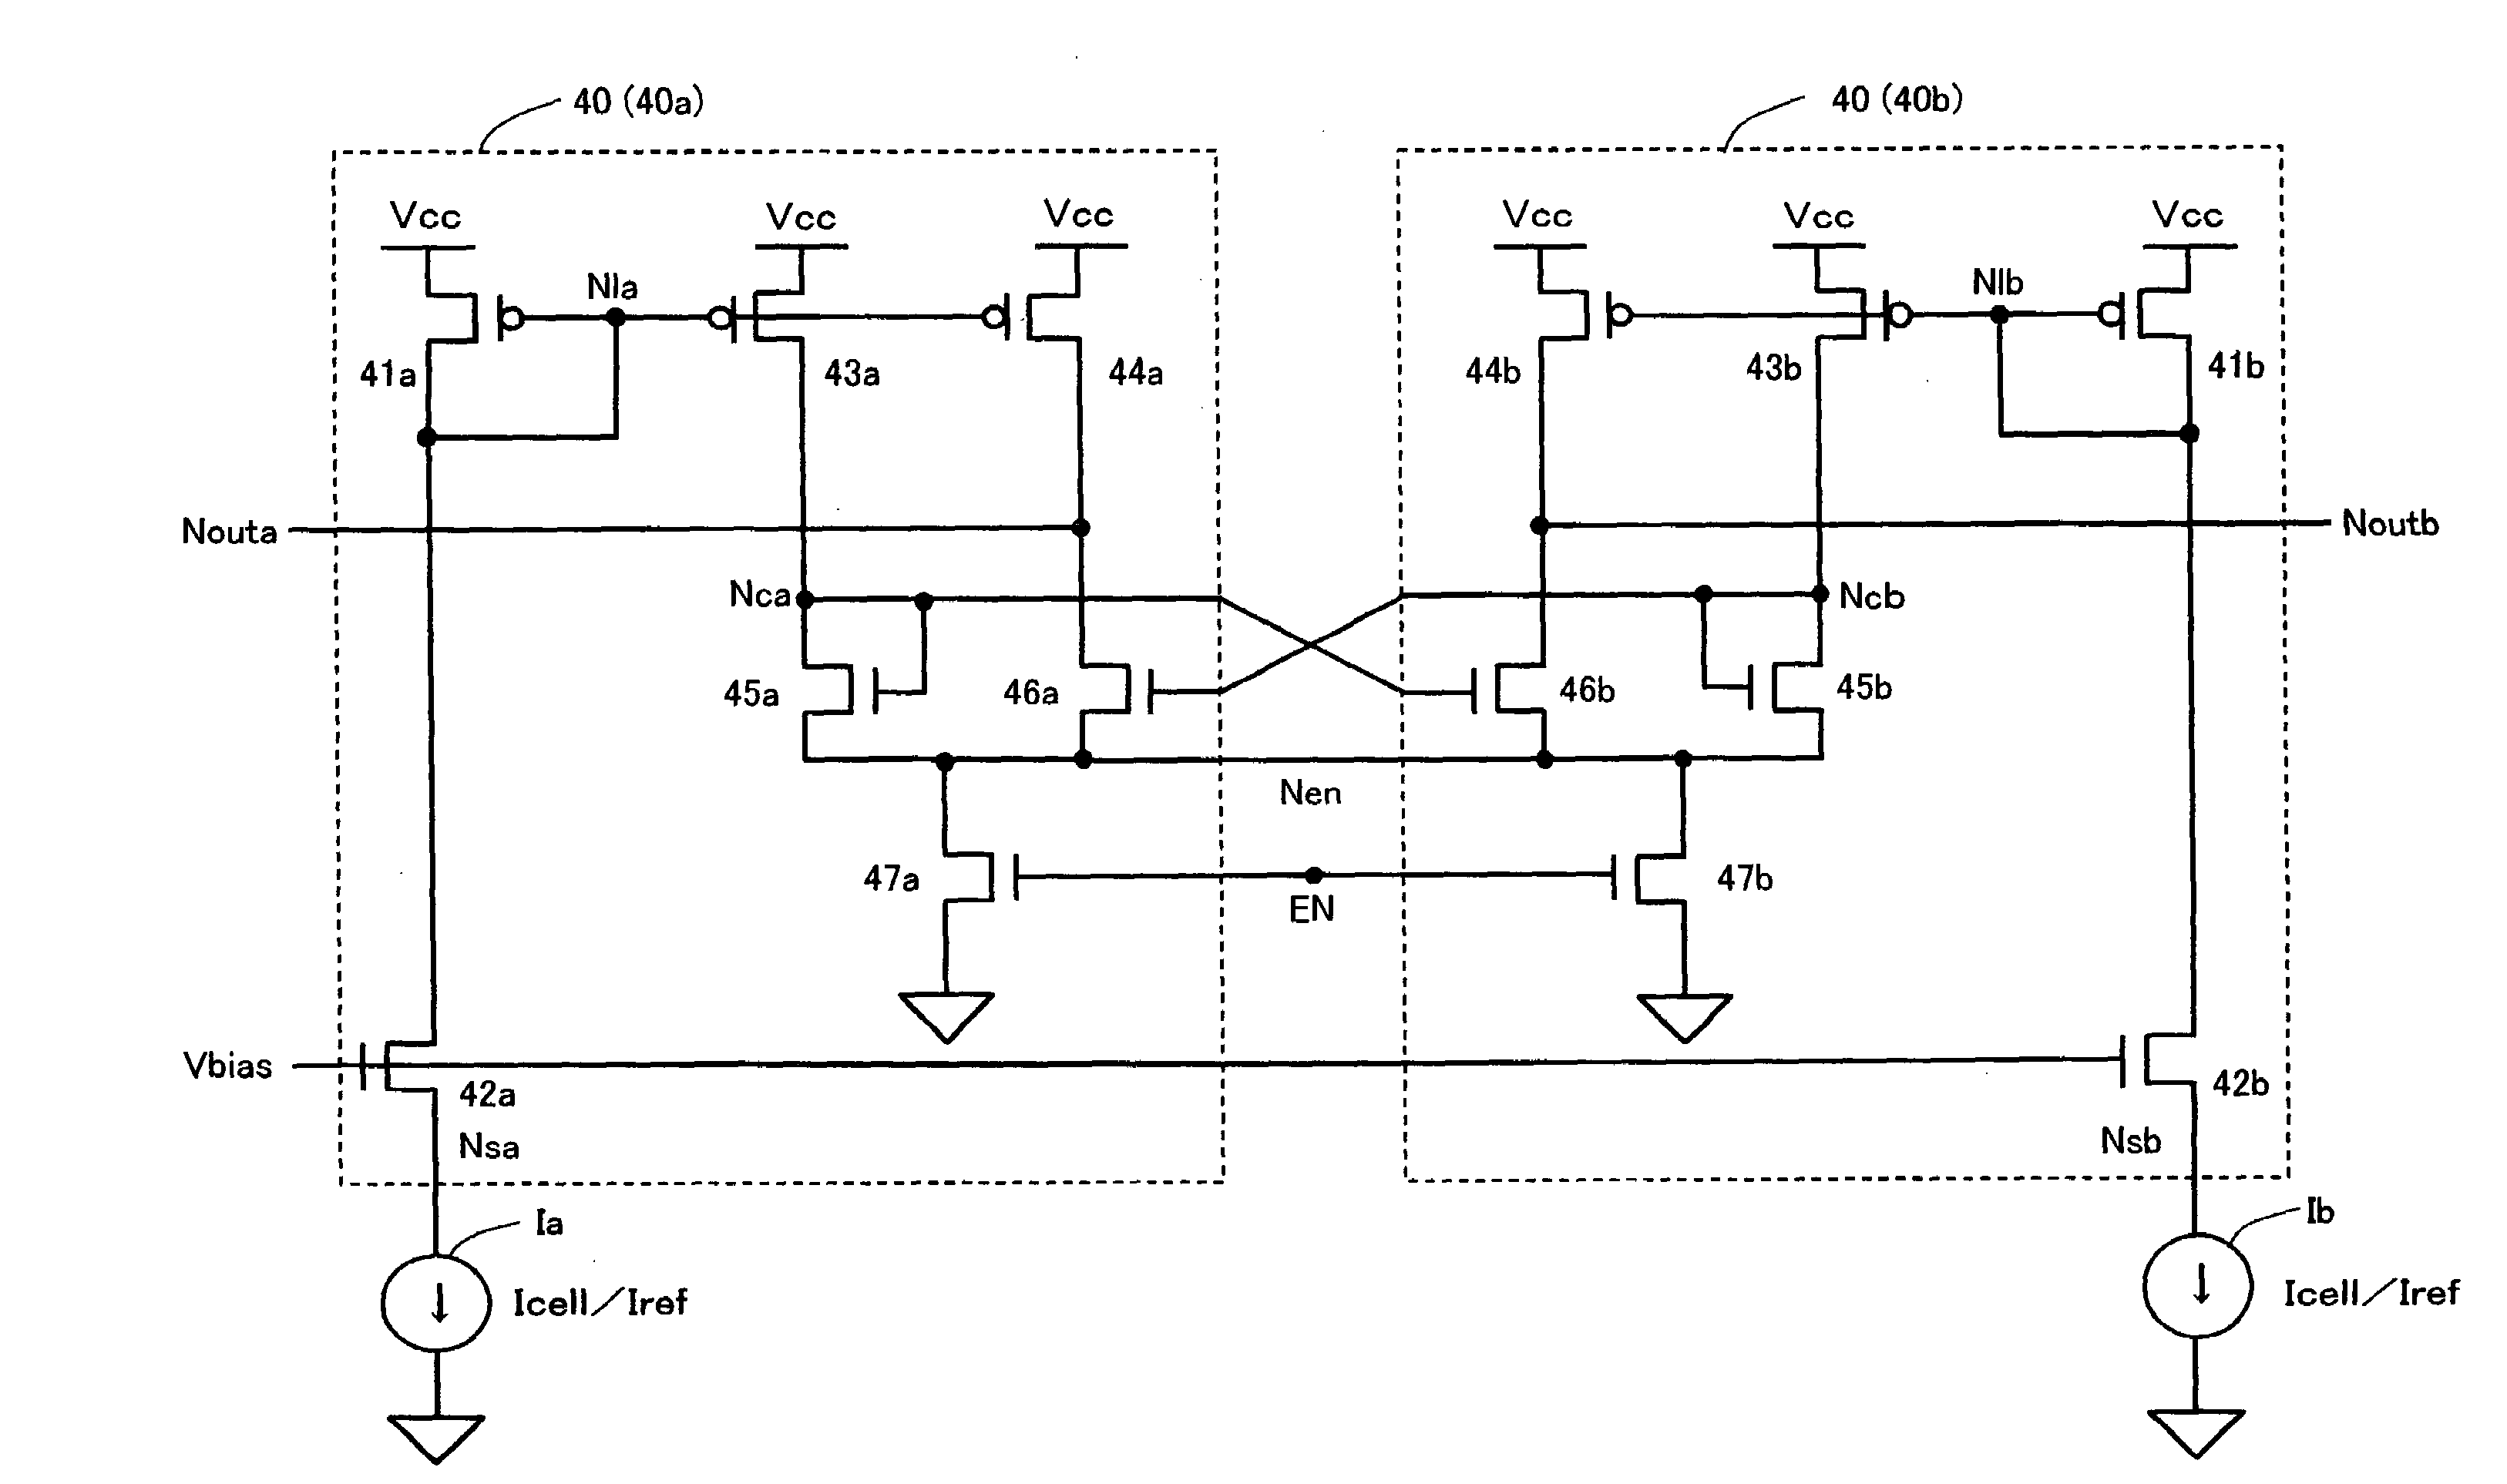 Bias voltage applying circuit and semiconductor memory device